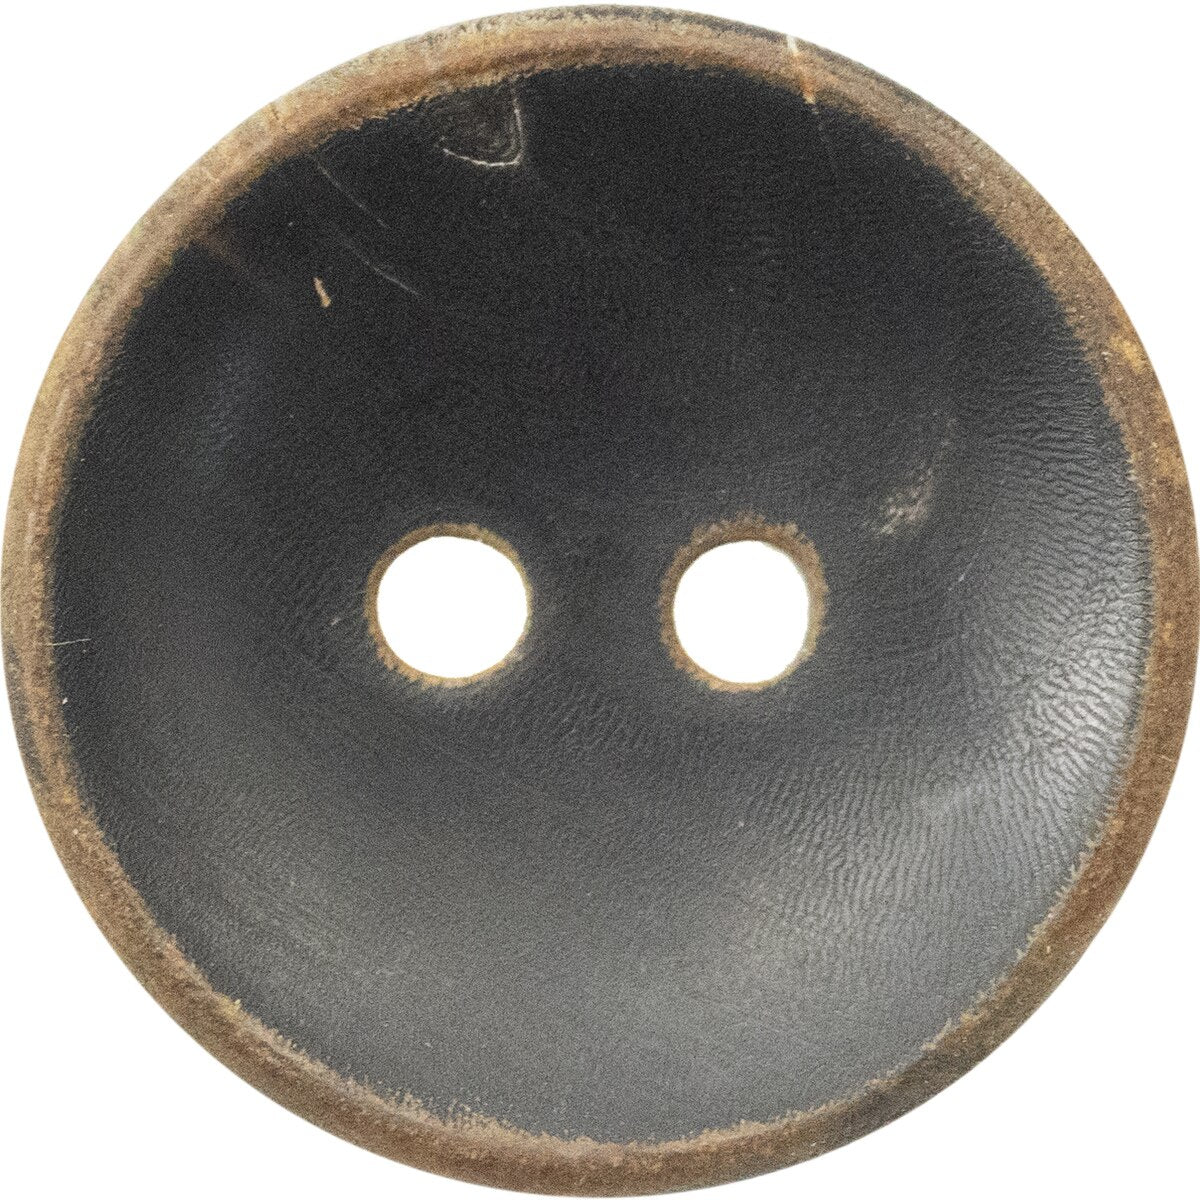 Black Bowl Two Hole Retro Horn Button  Sewing Accessories Cute Buttons